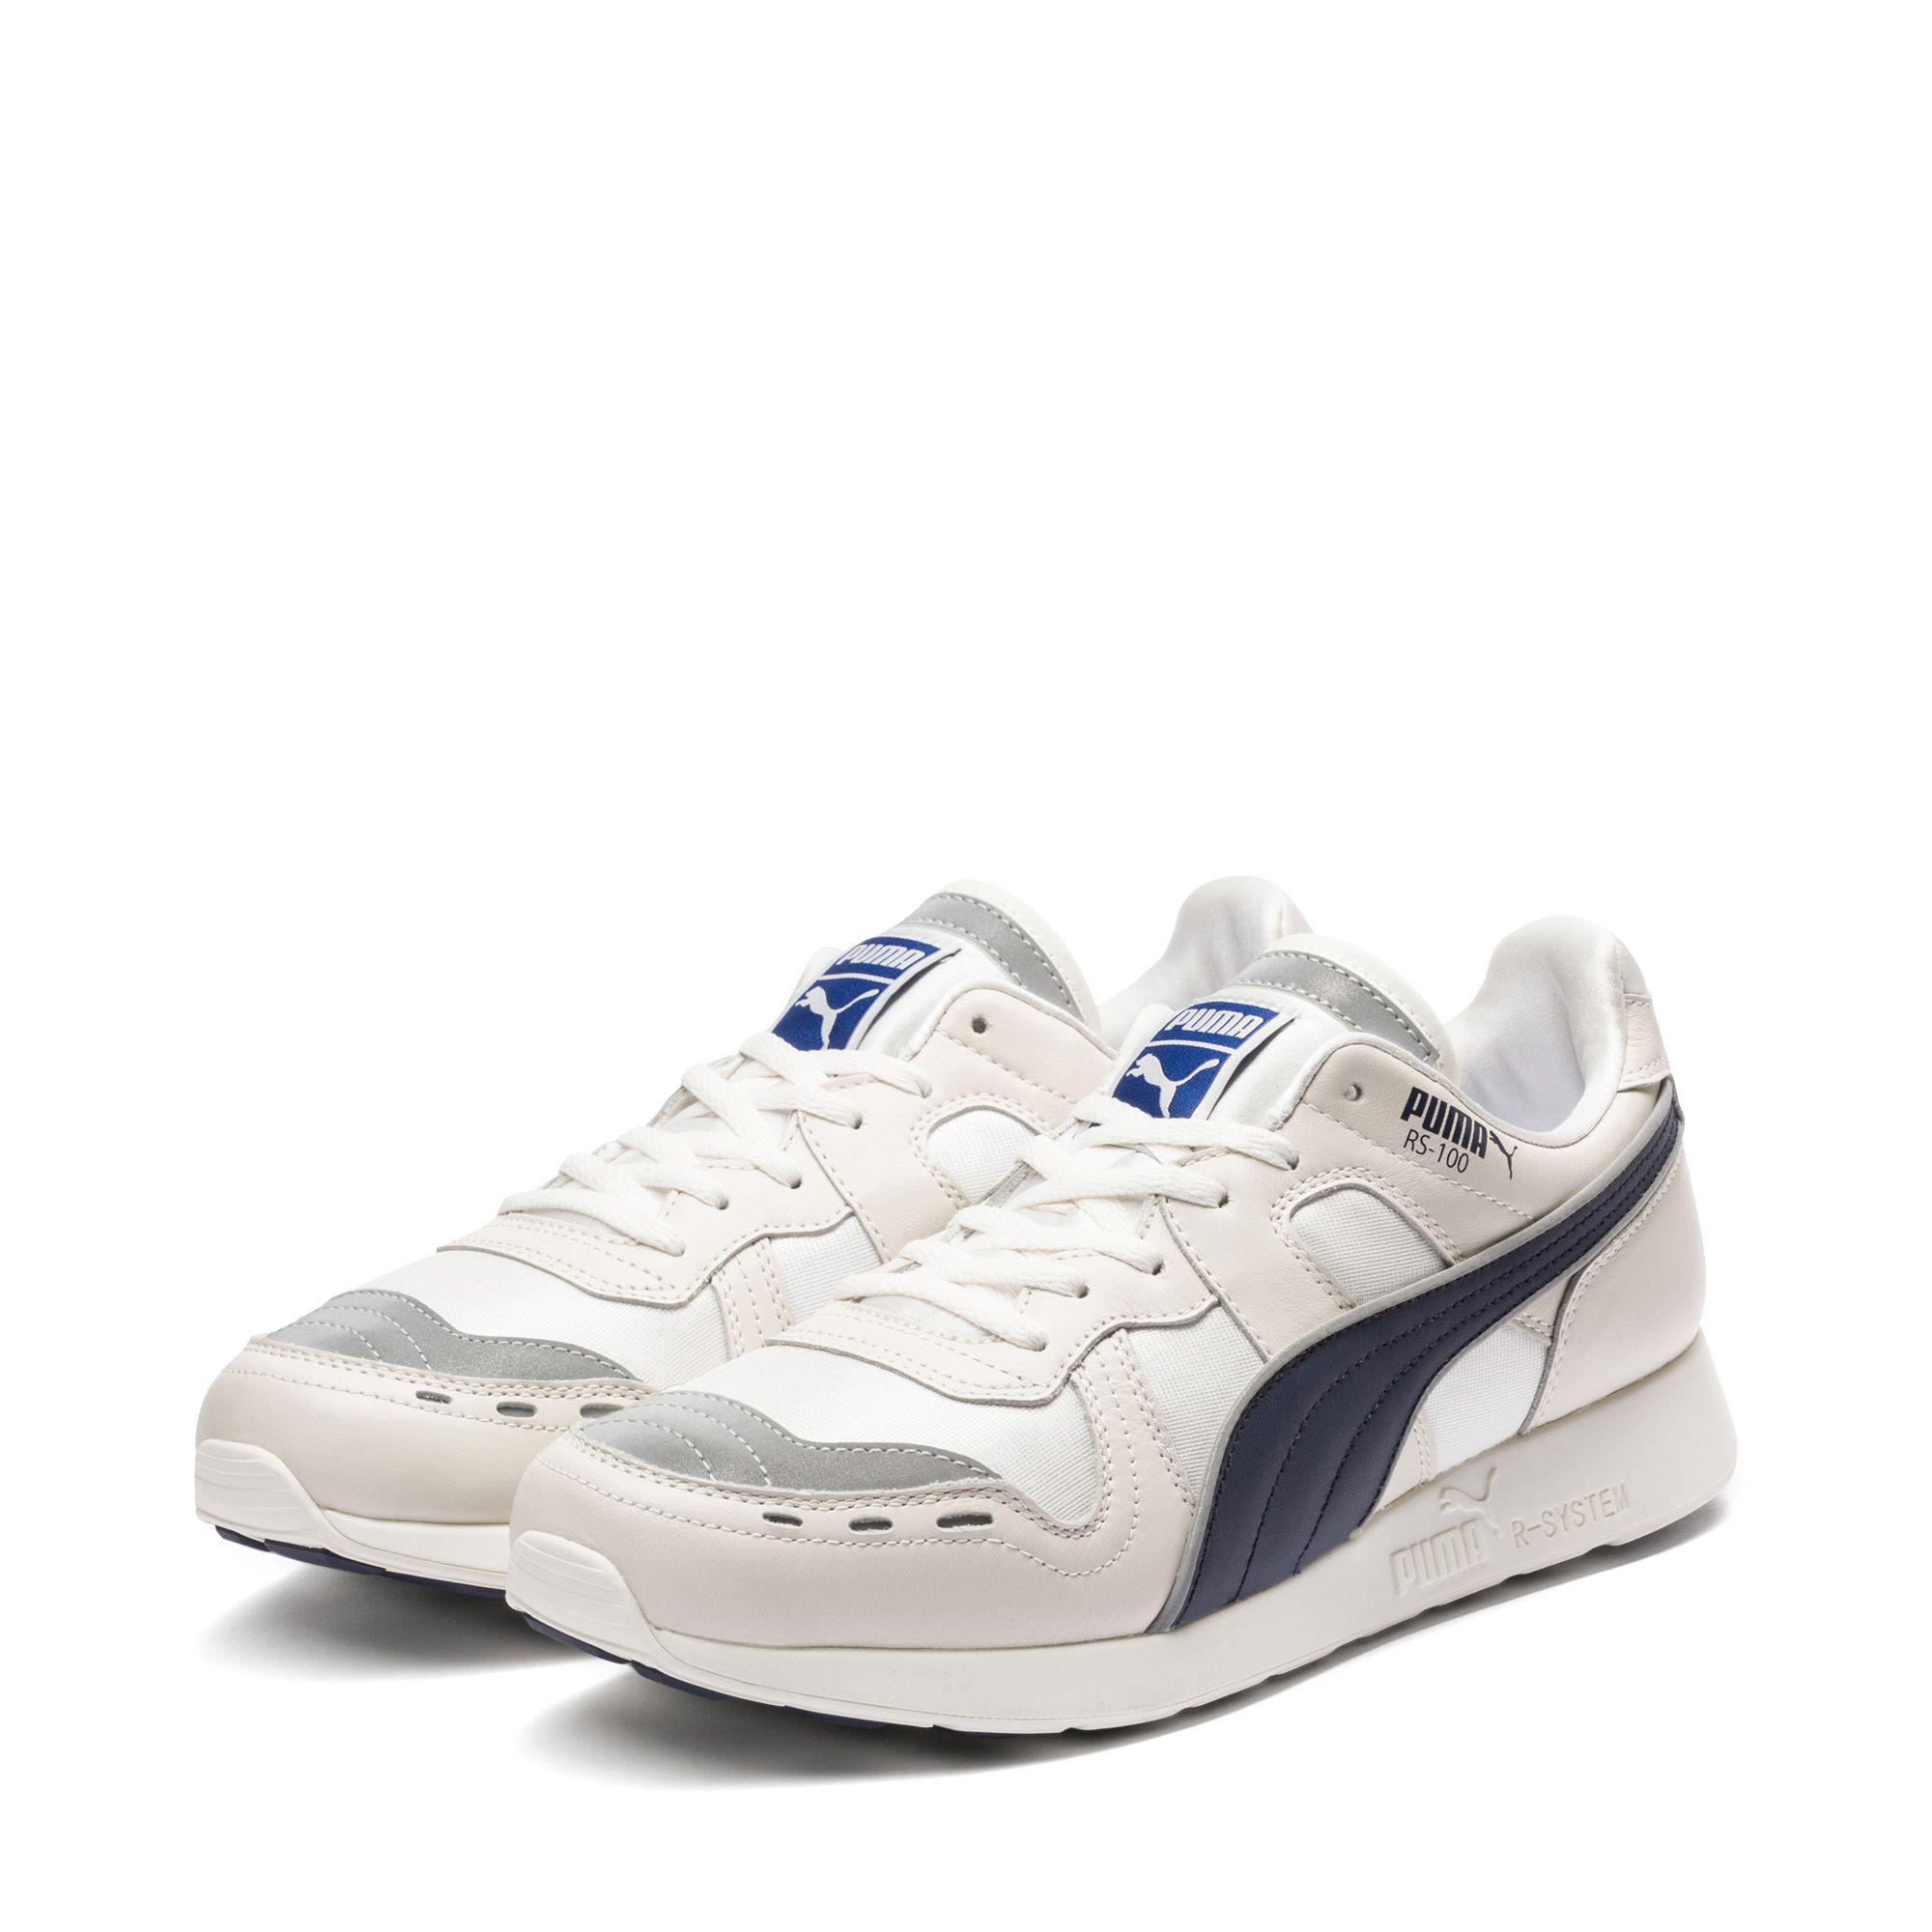 PUMA Leather Rs-100 Pc Sneakers for Men - Lyst